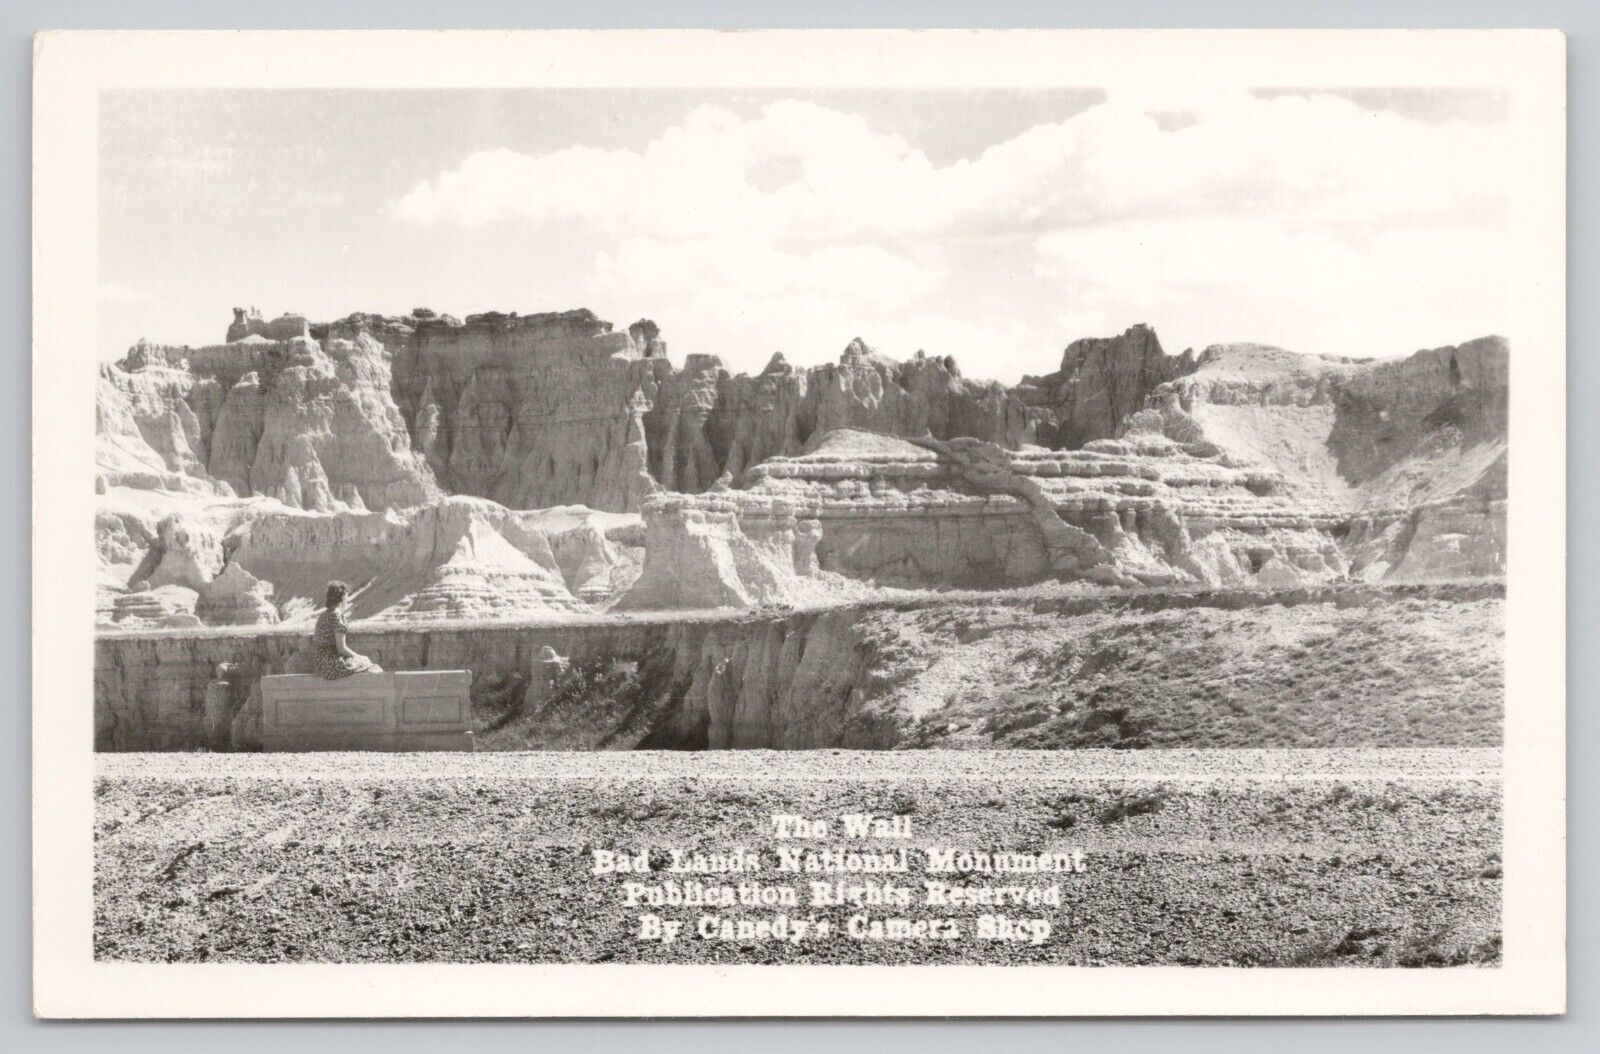 Postcard RPPC The Wall Bad Lands National Monument by Canedy's Camera Shop VTG